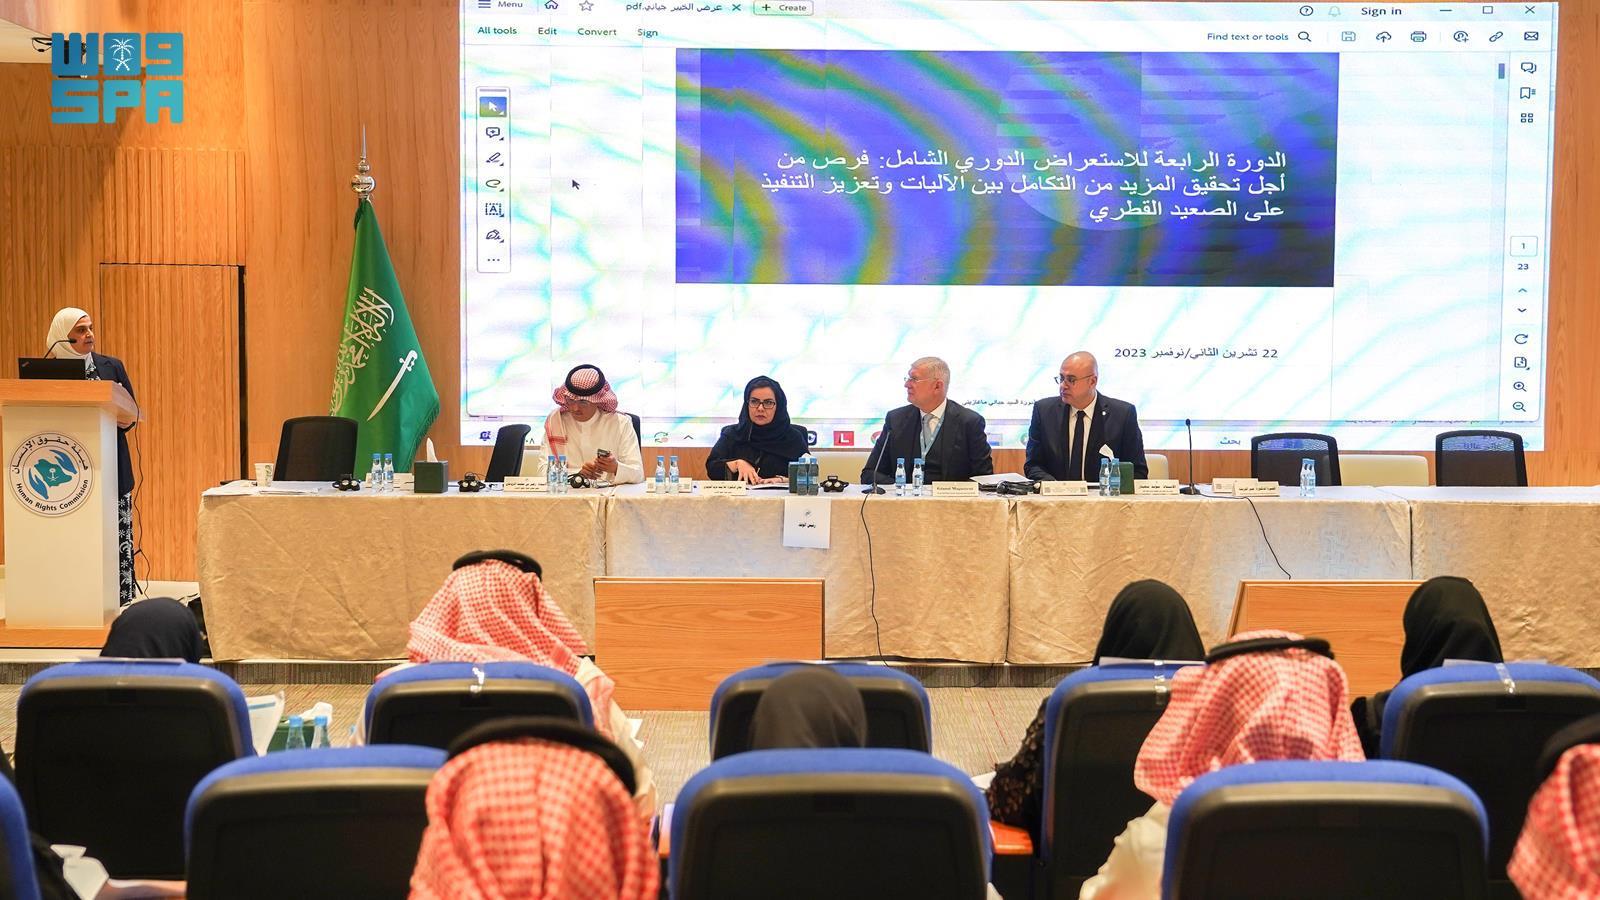 In a workshop presented by experts in cooperation with the Office of the High Commissioner for Human Rights, the Human Rights Commission reviews the mechanisms and objectives of the universal periodic review